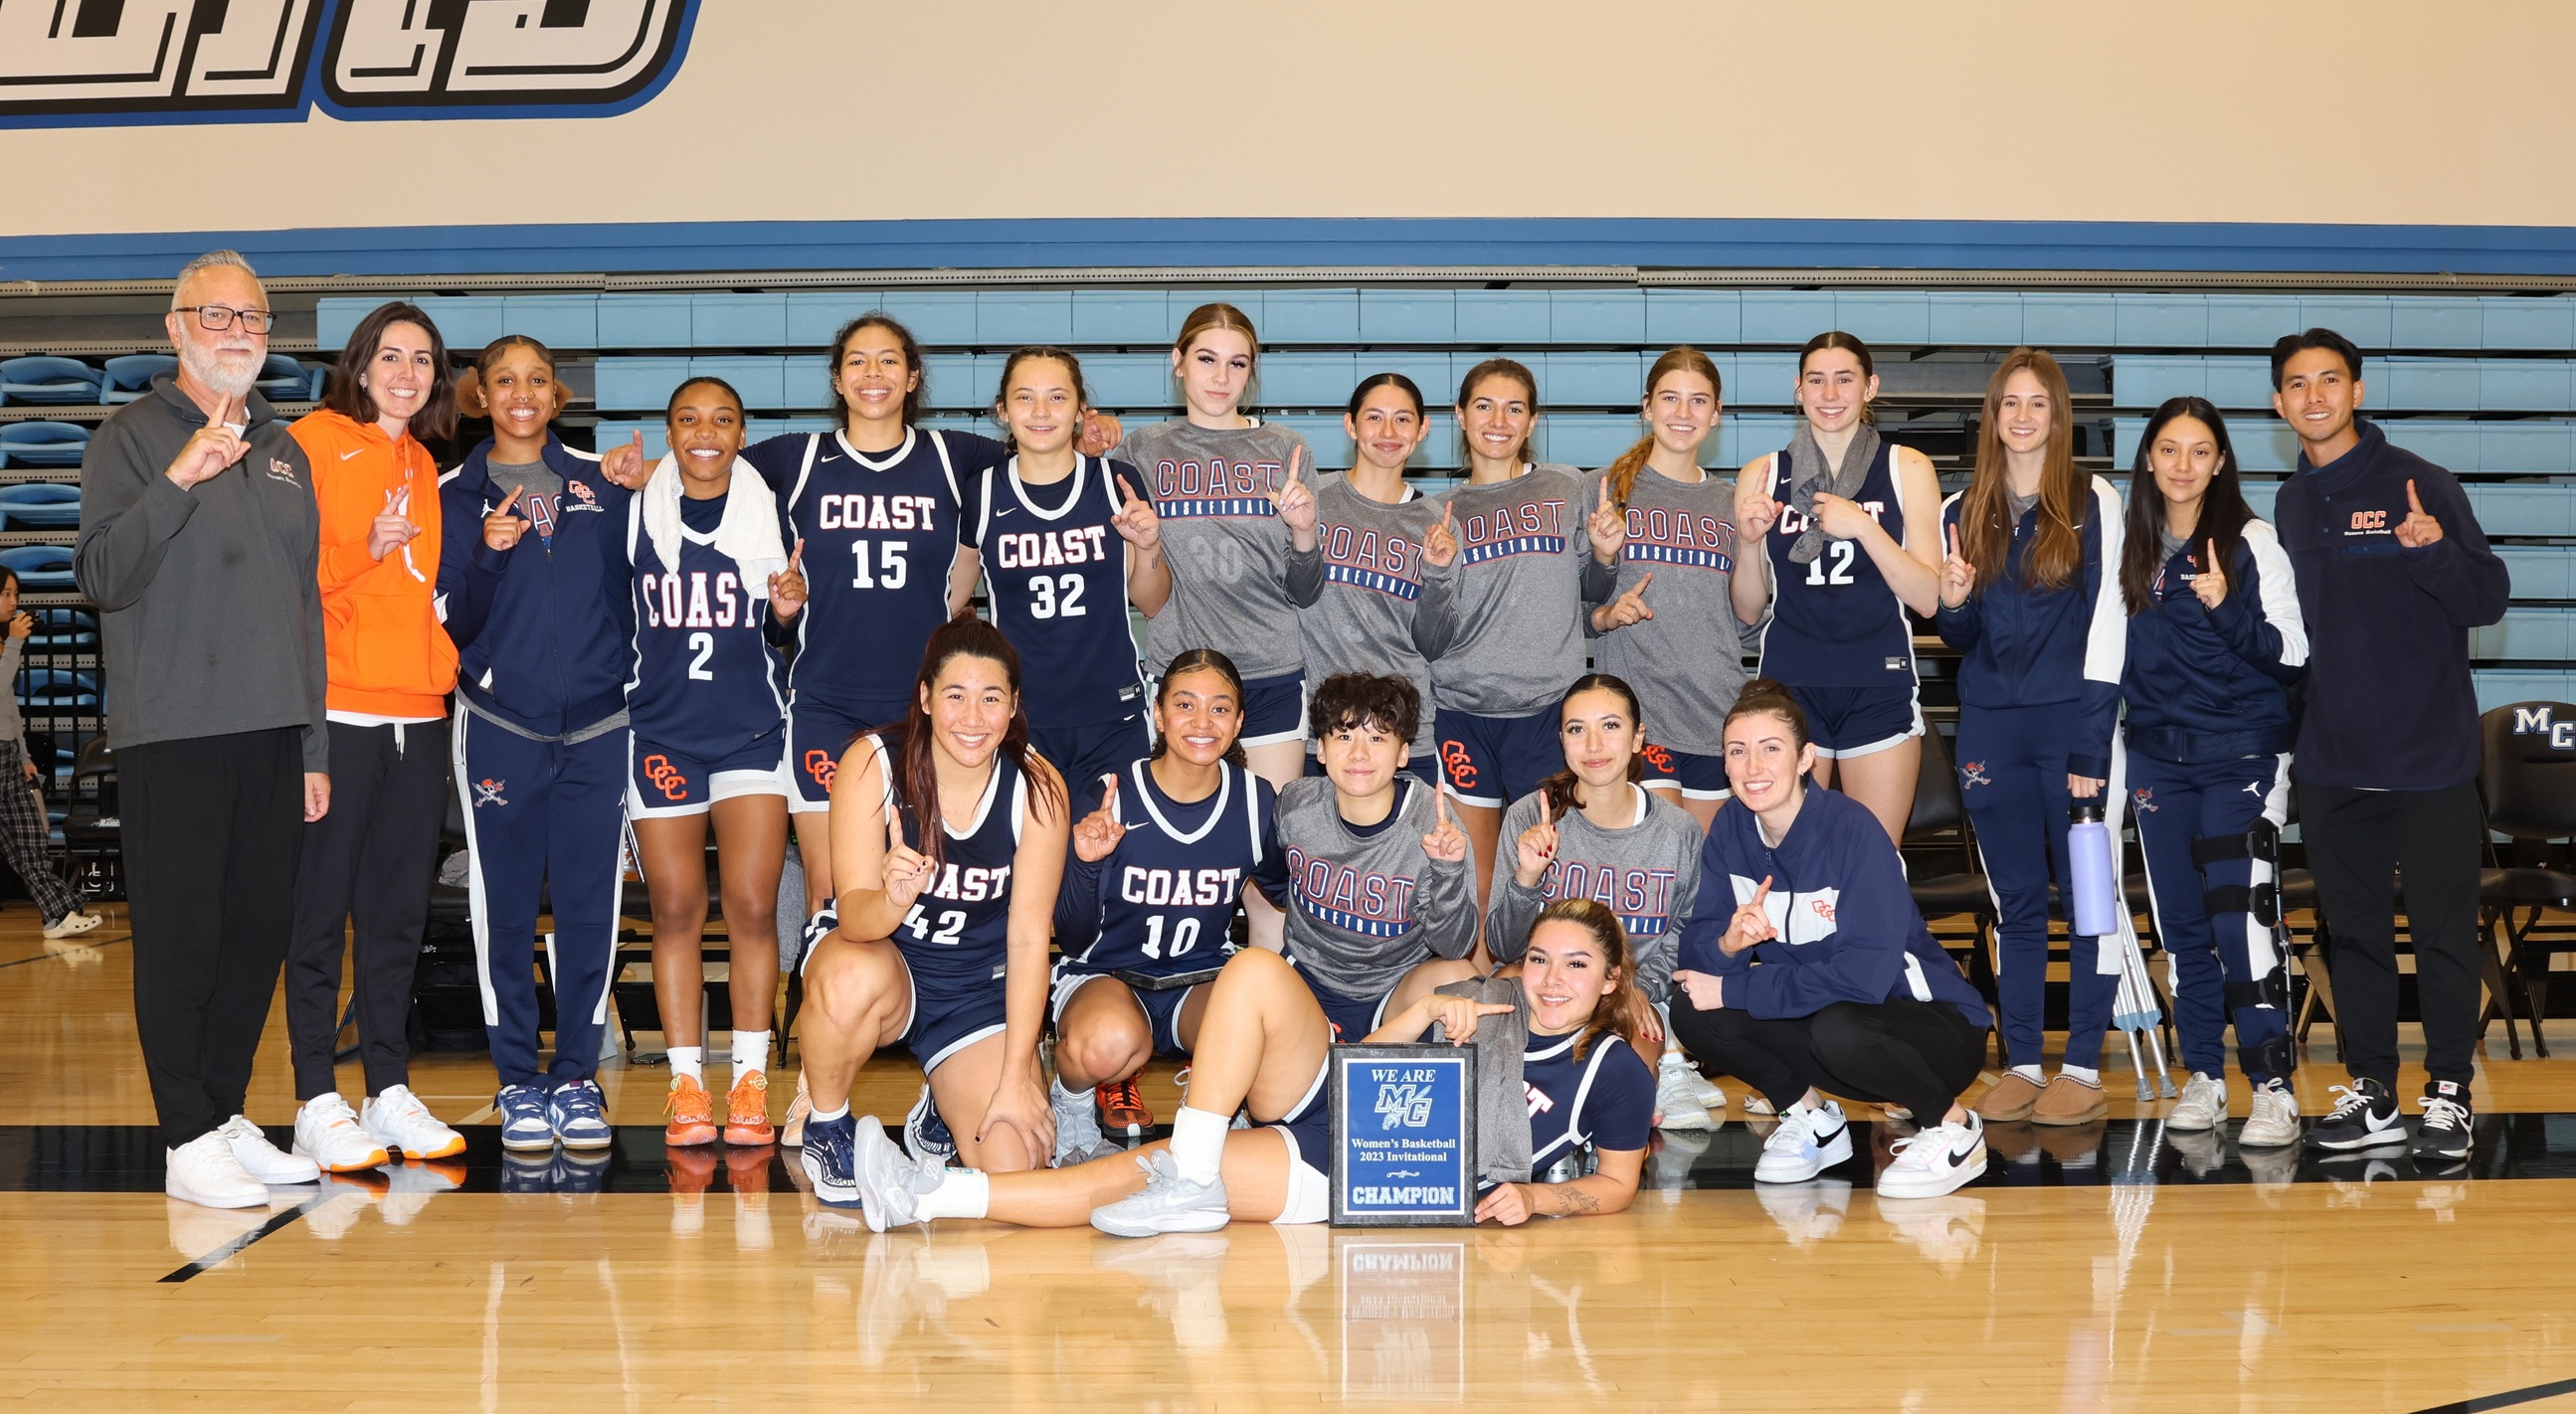 Pirates capture Moorpark College tournament with win over ELAC